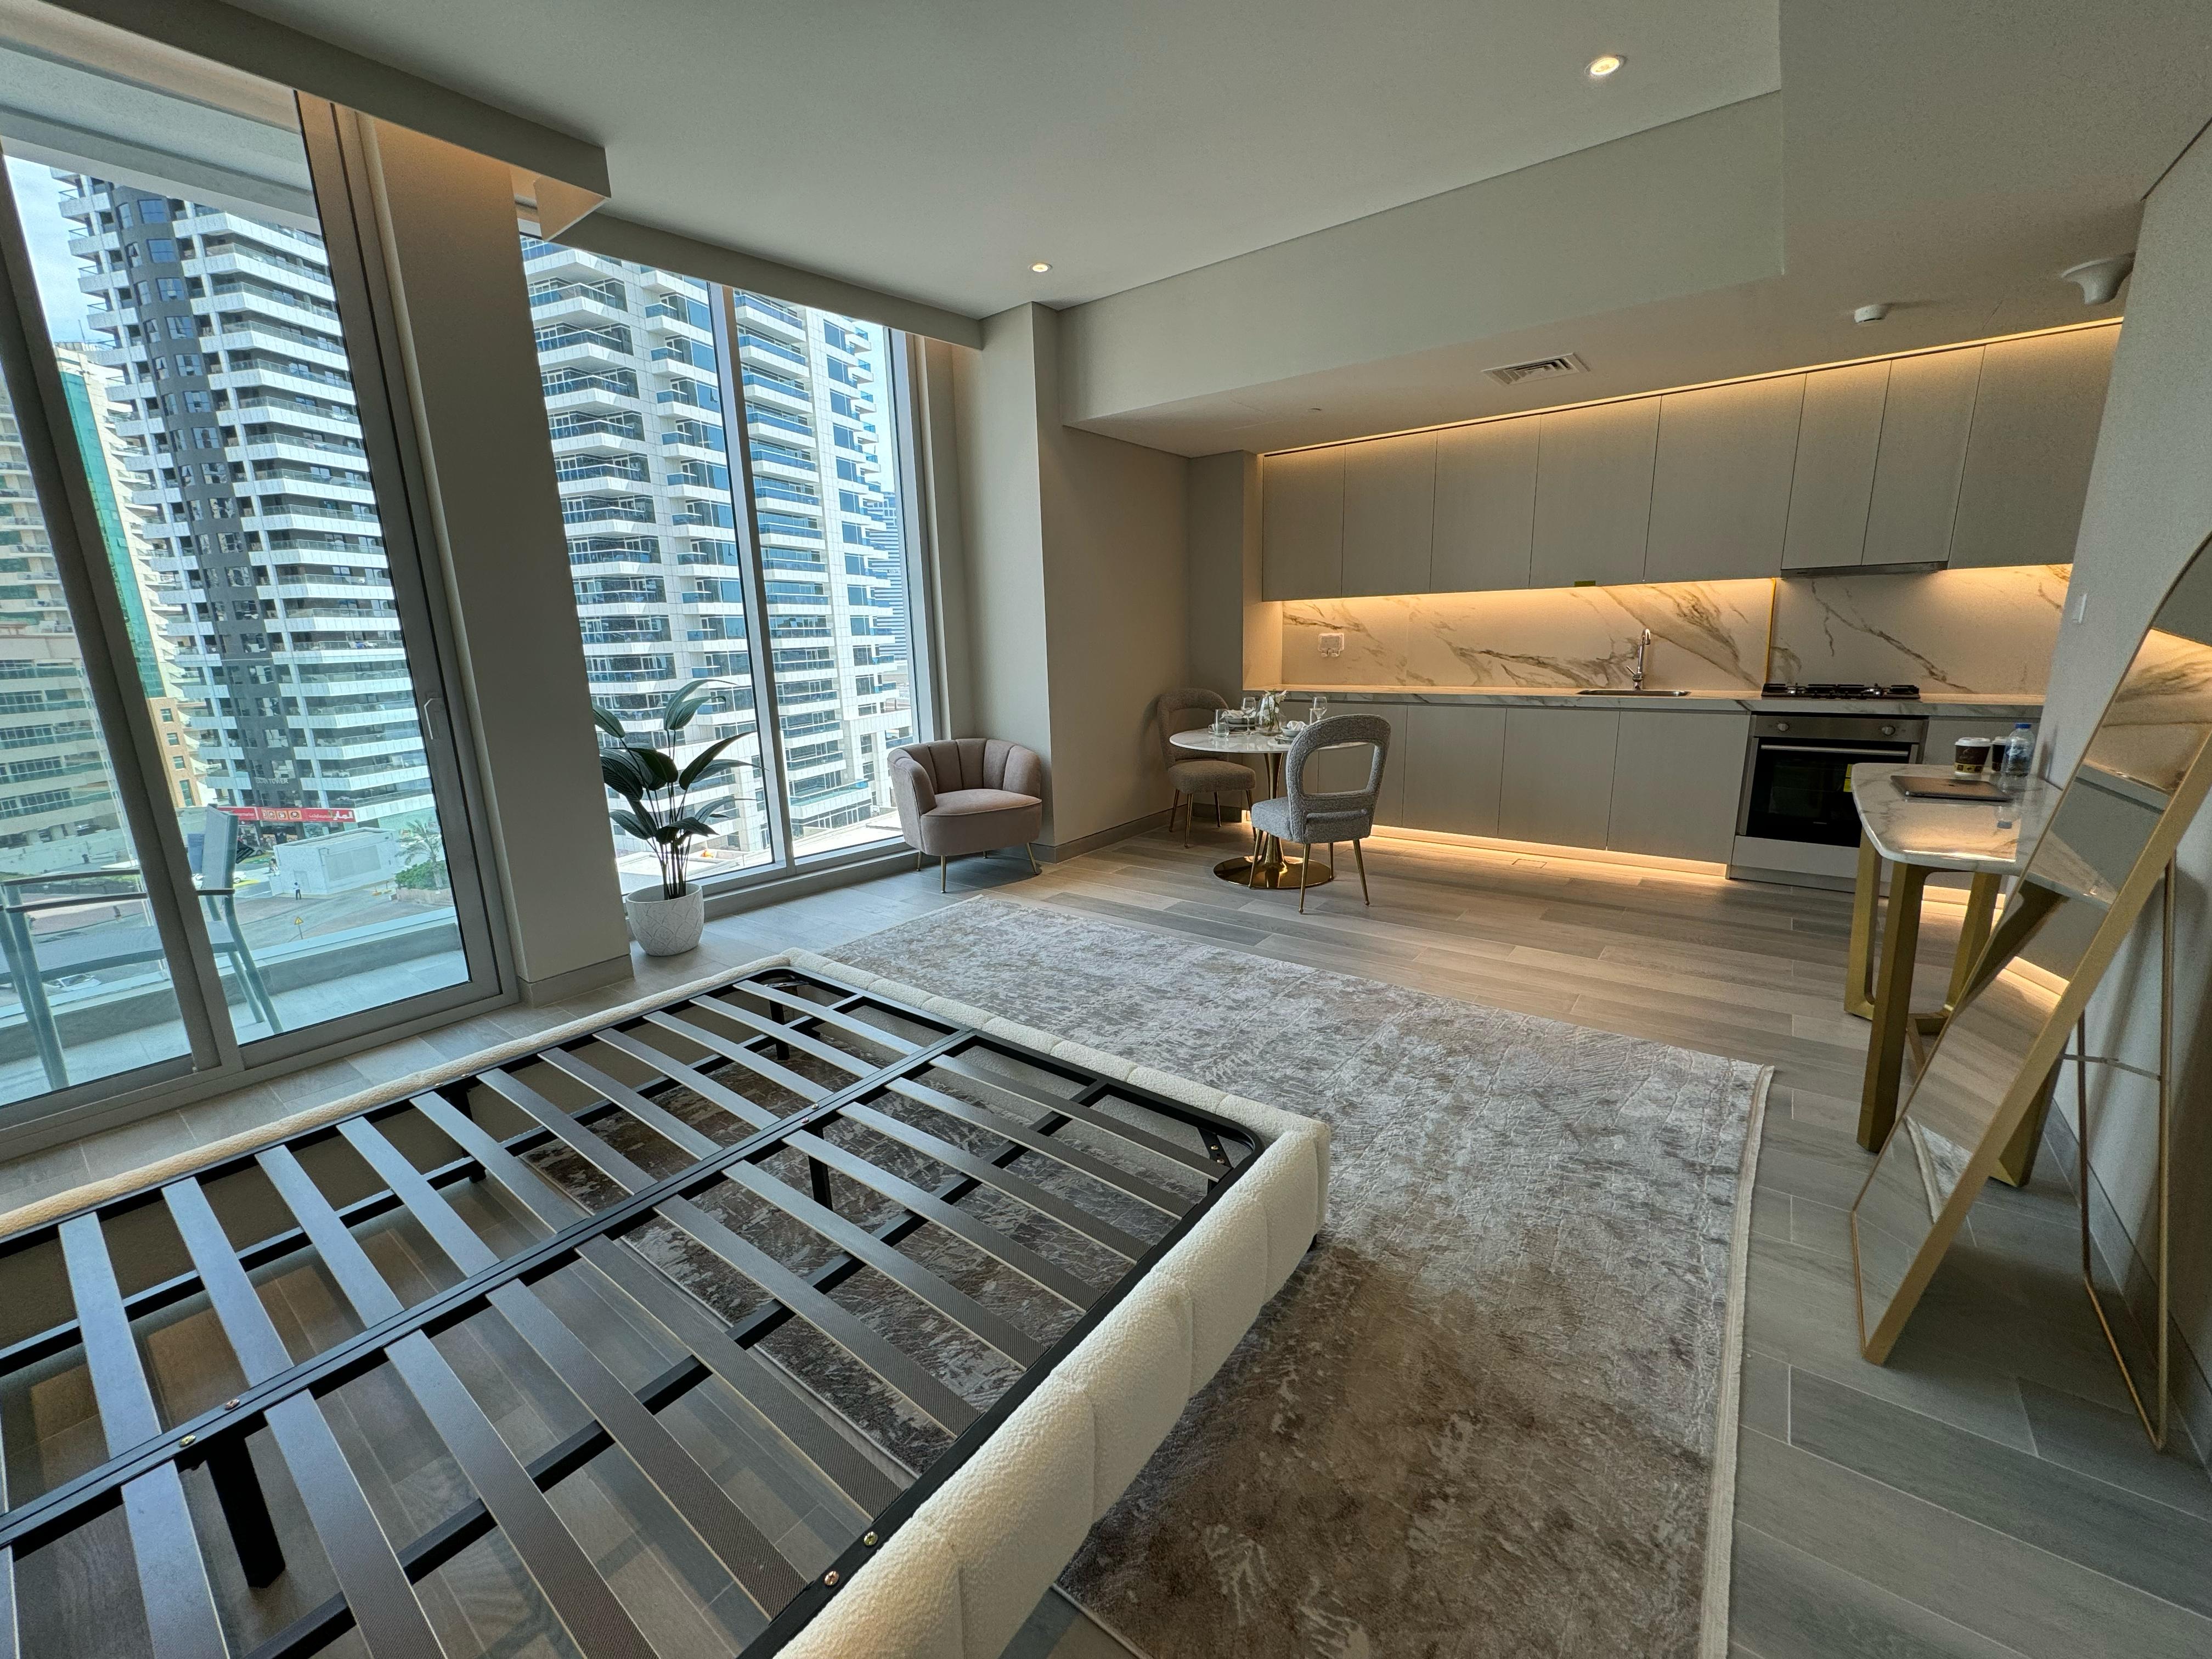 Luxurious Studio Apartment with Rooftop Pool and Stunning Views in Dubai